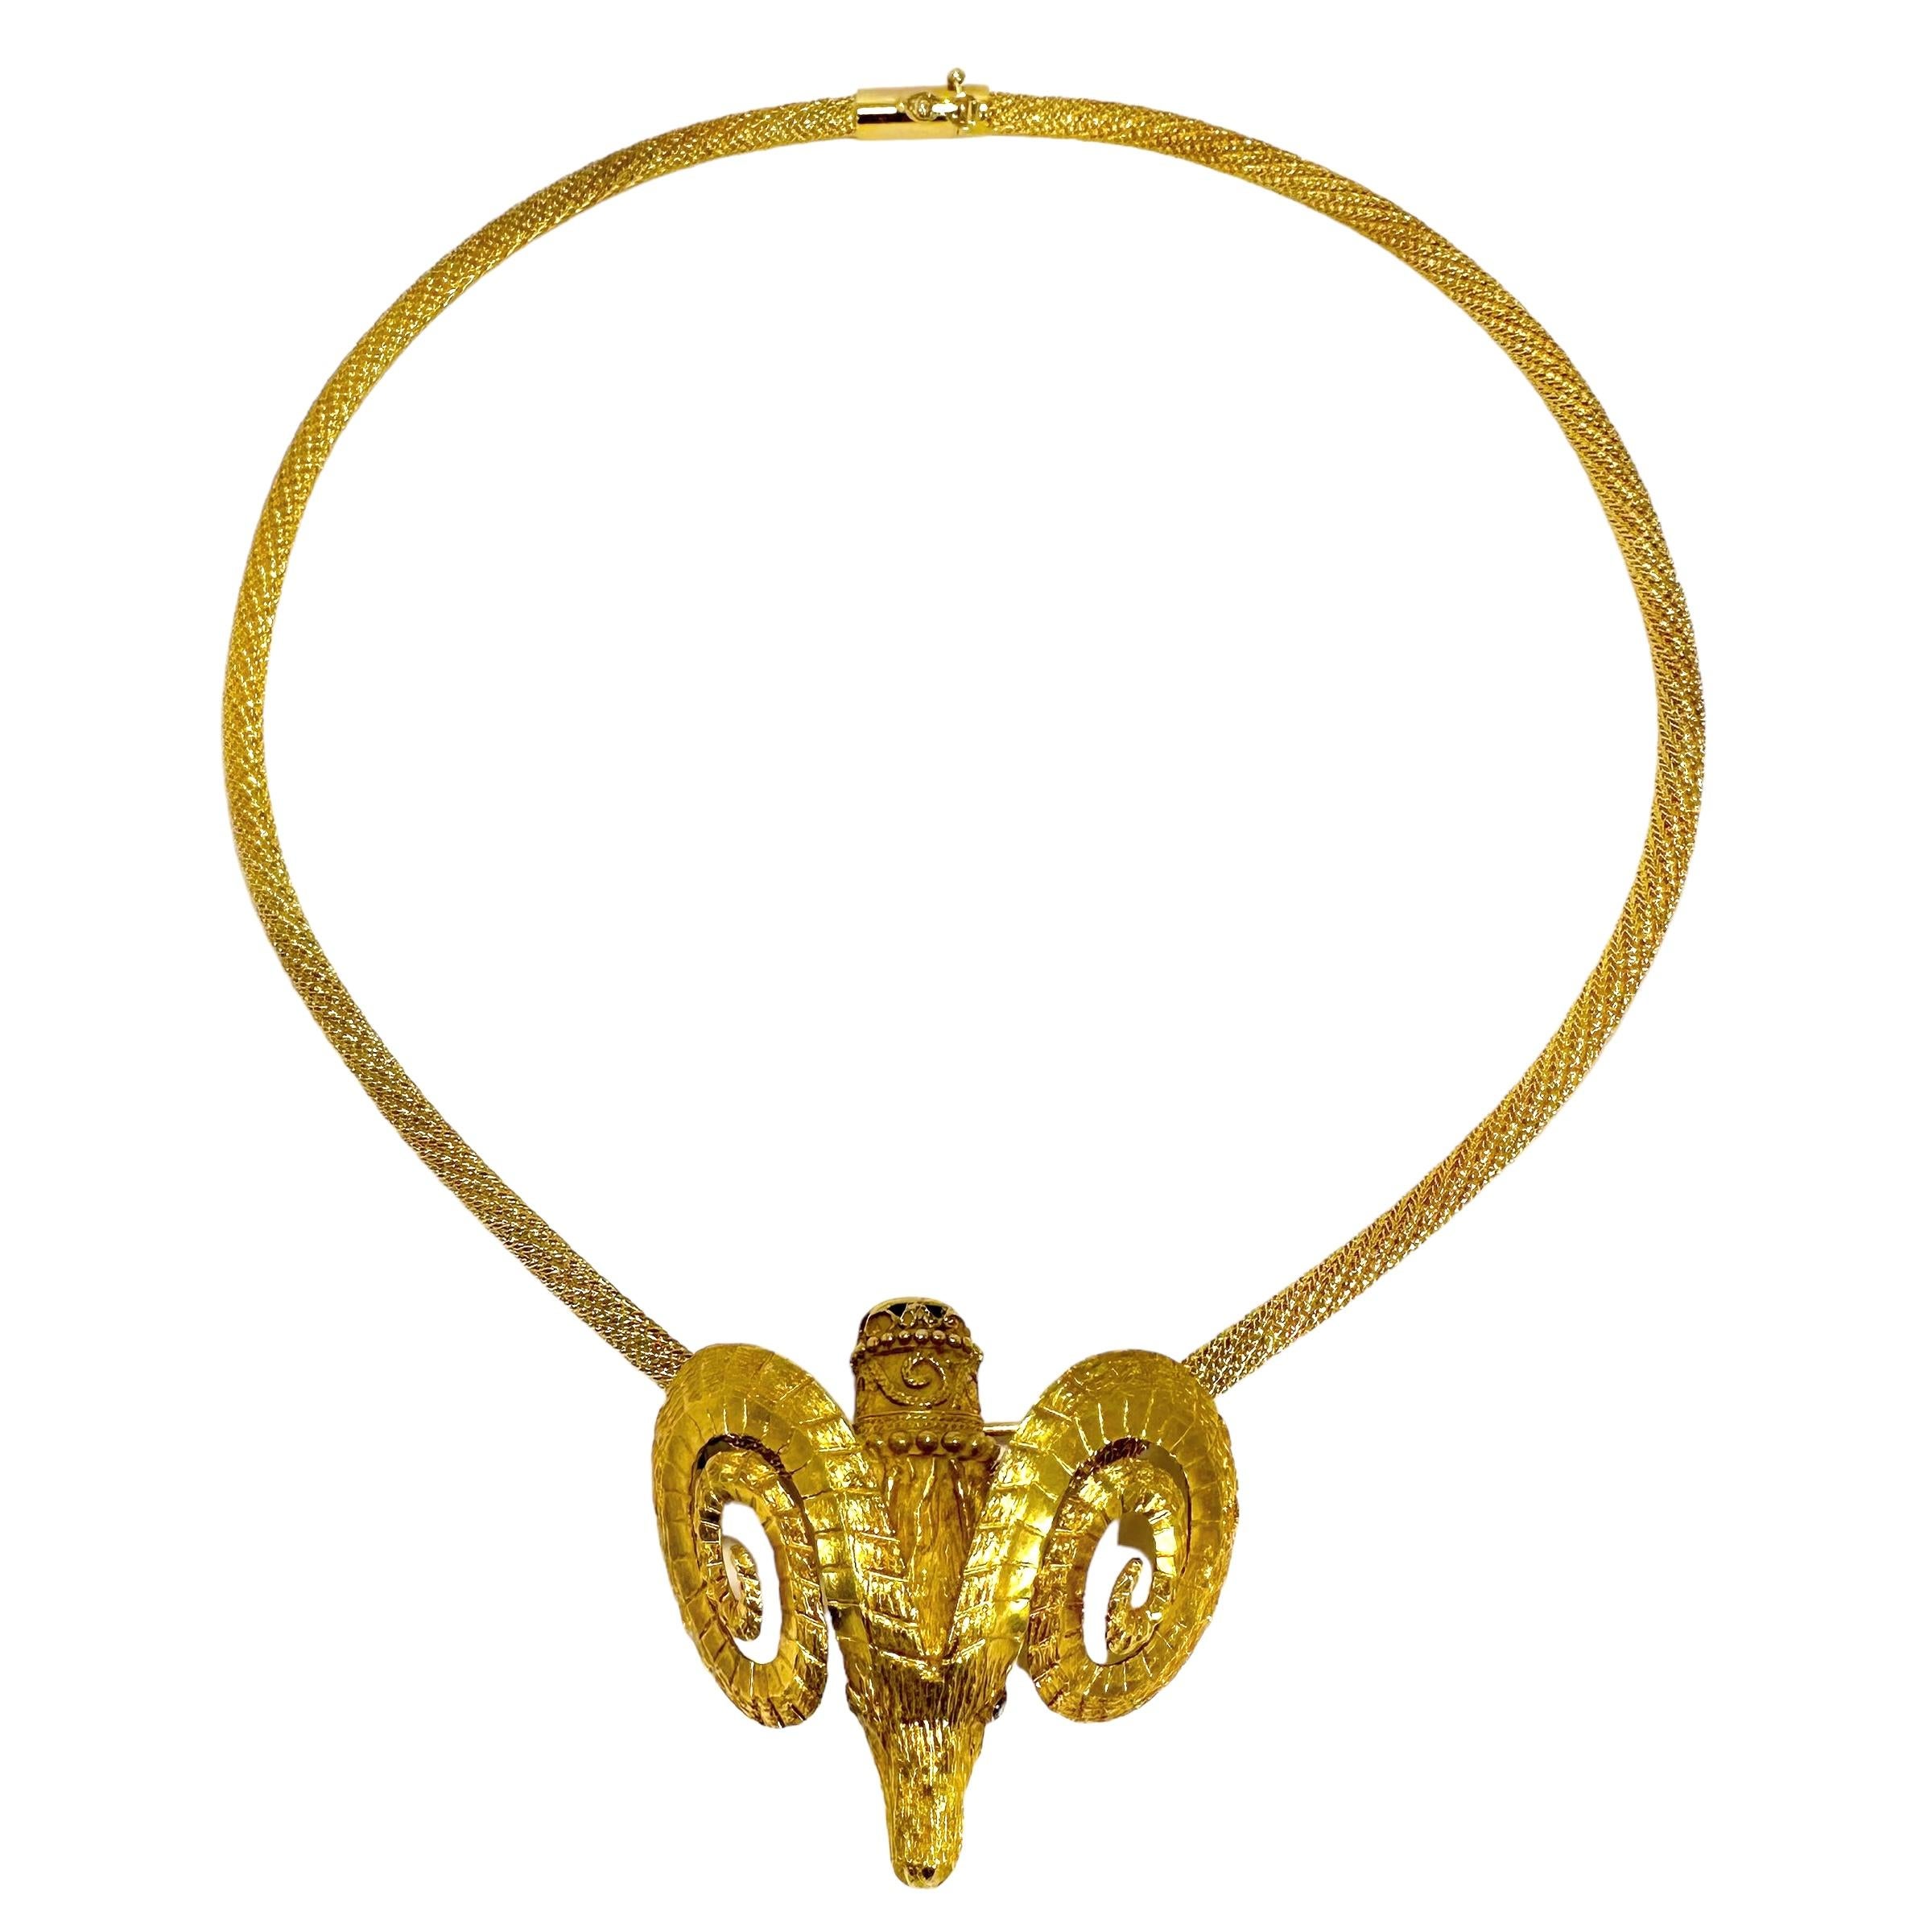 Classical Greek Iconic Vintage Gold Rams Head Brooch by Lalaounis with Unbranded Gold Necklace